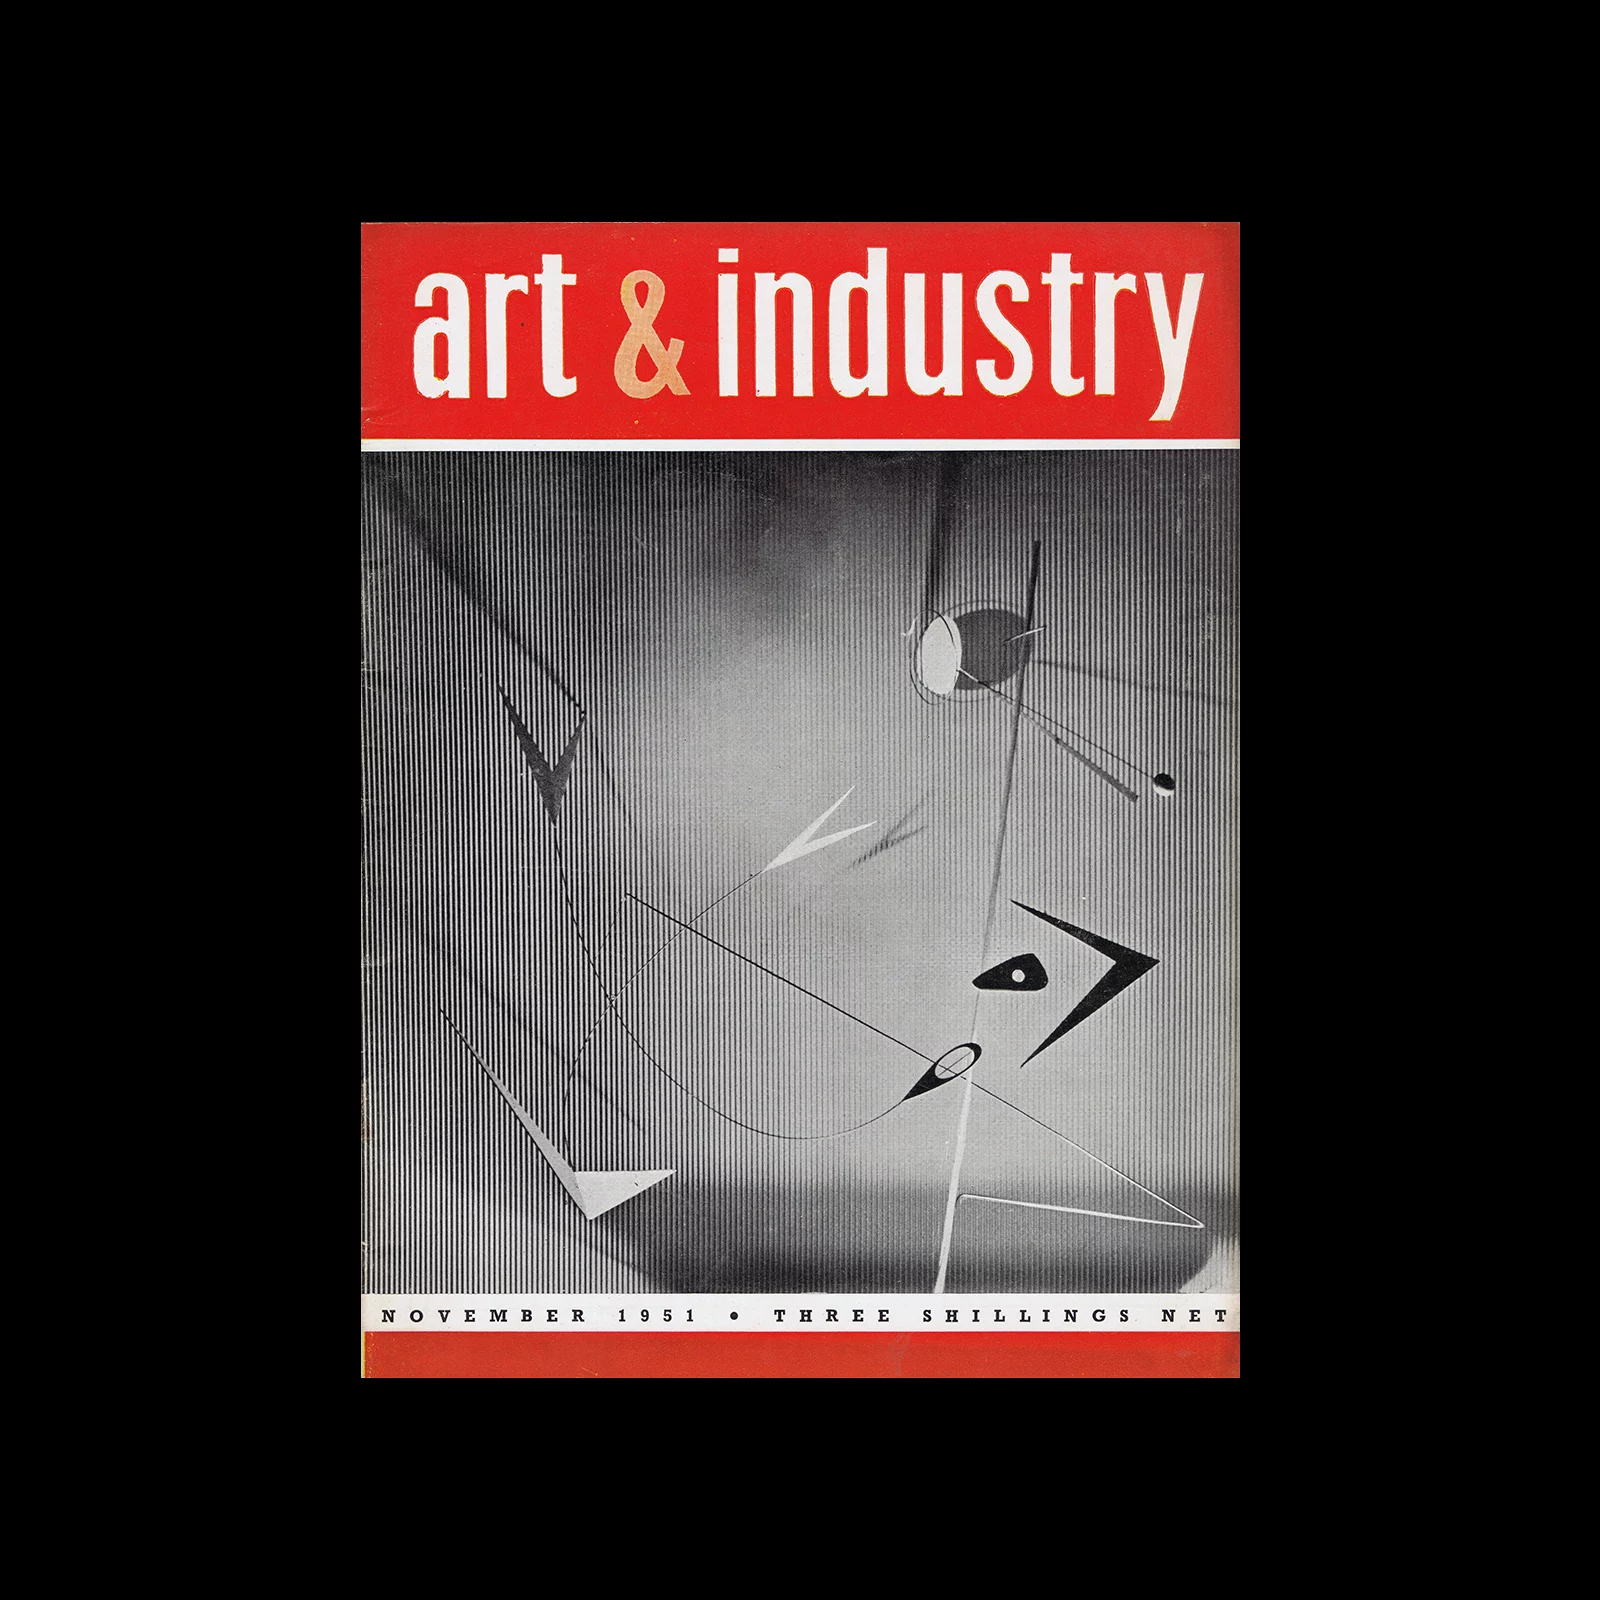 Art and Industry 305, November 1951